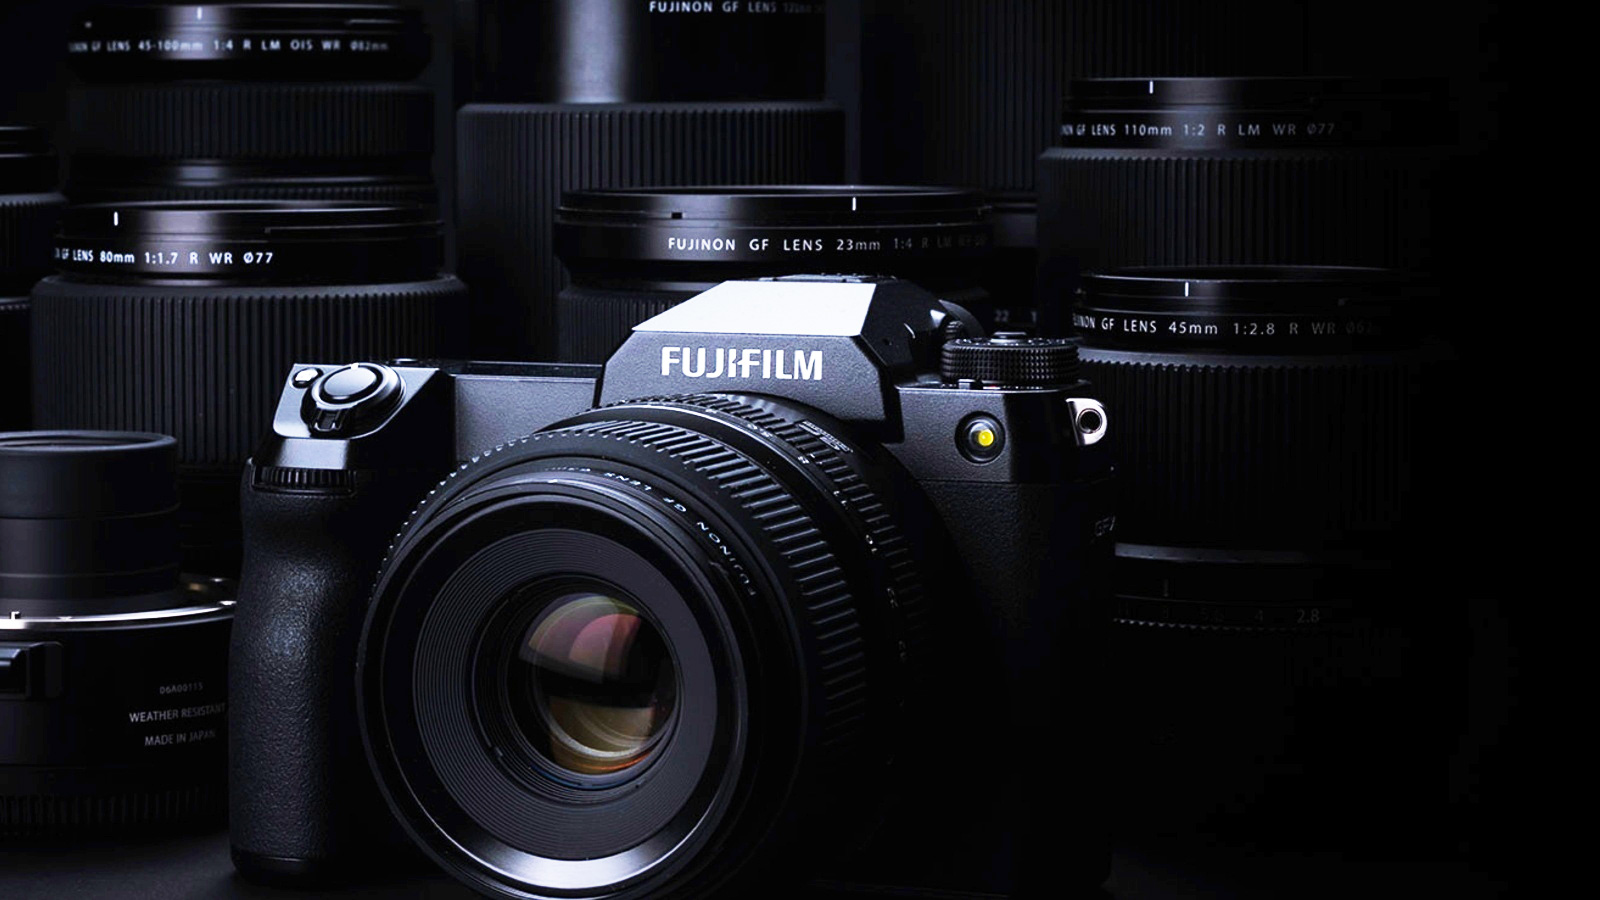 Fujifilm confirms ransomware attack disrupted business operations